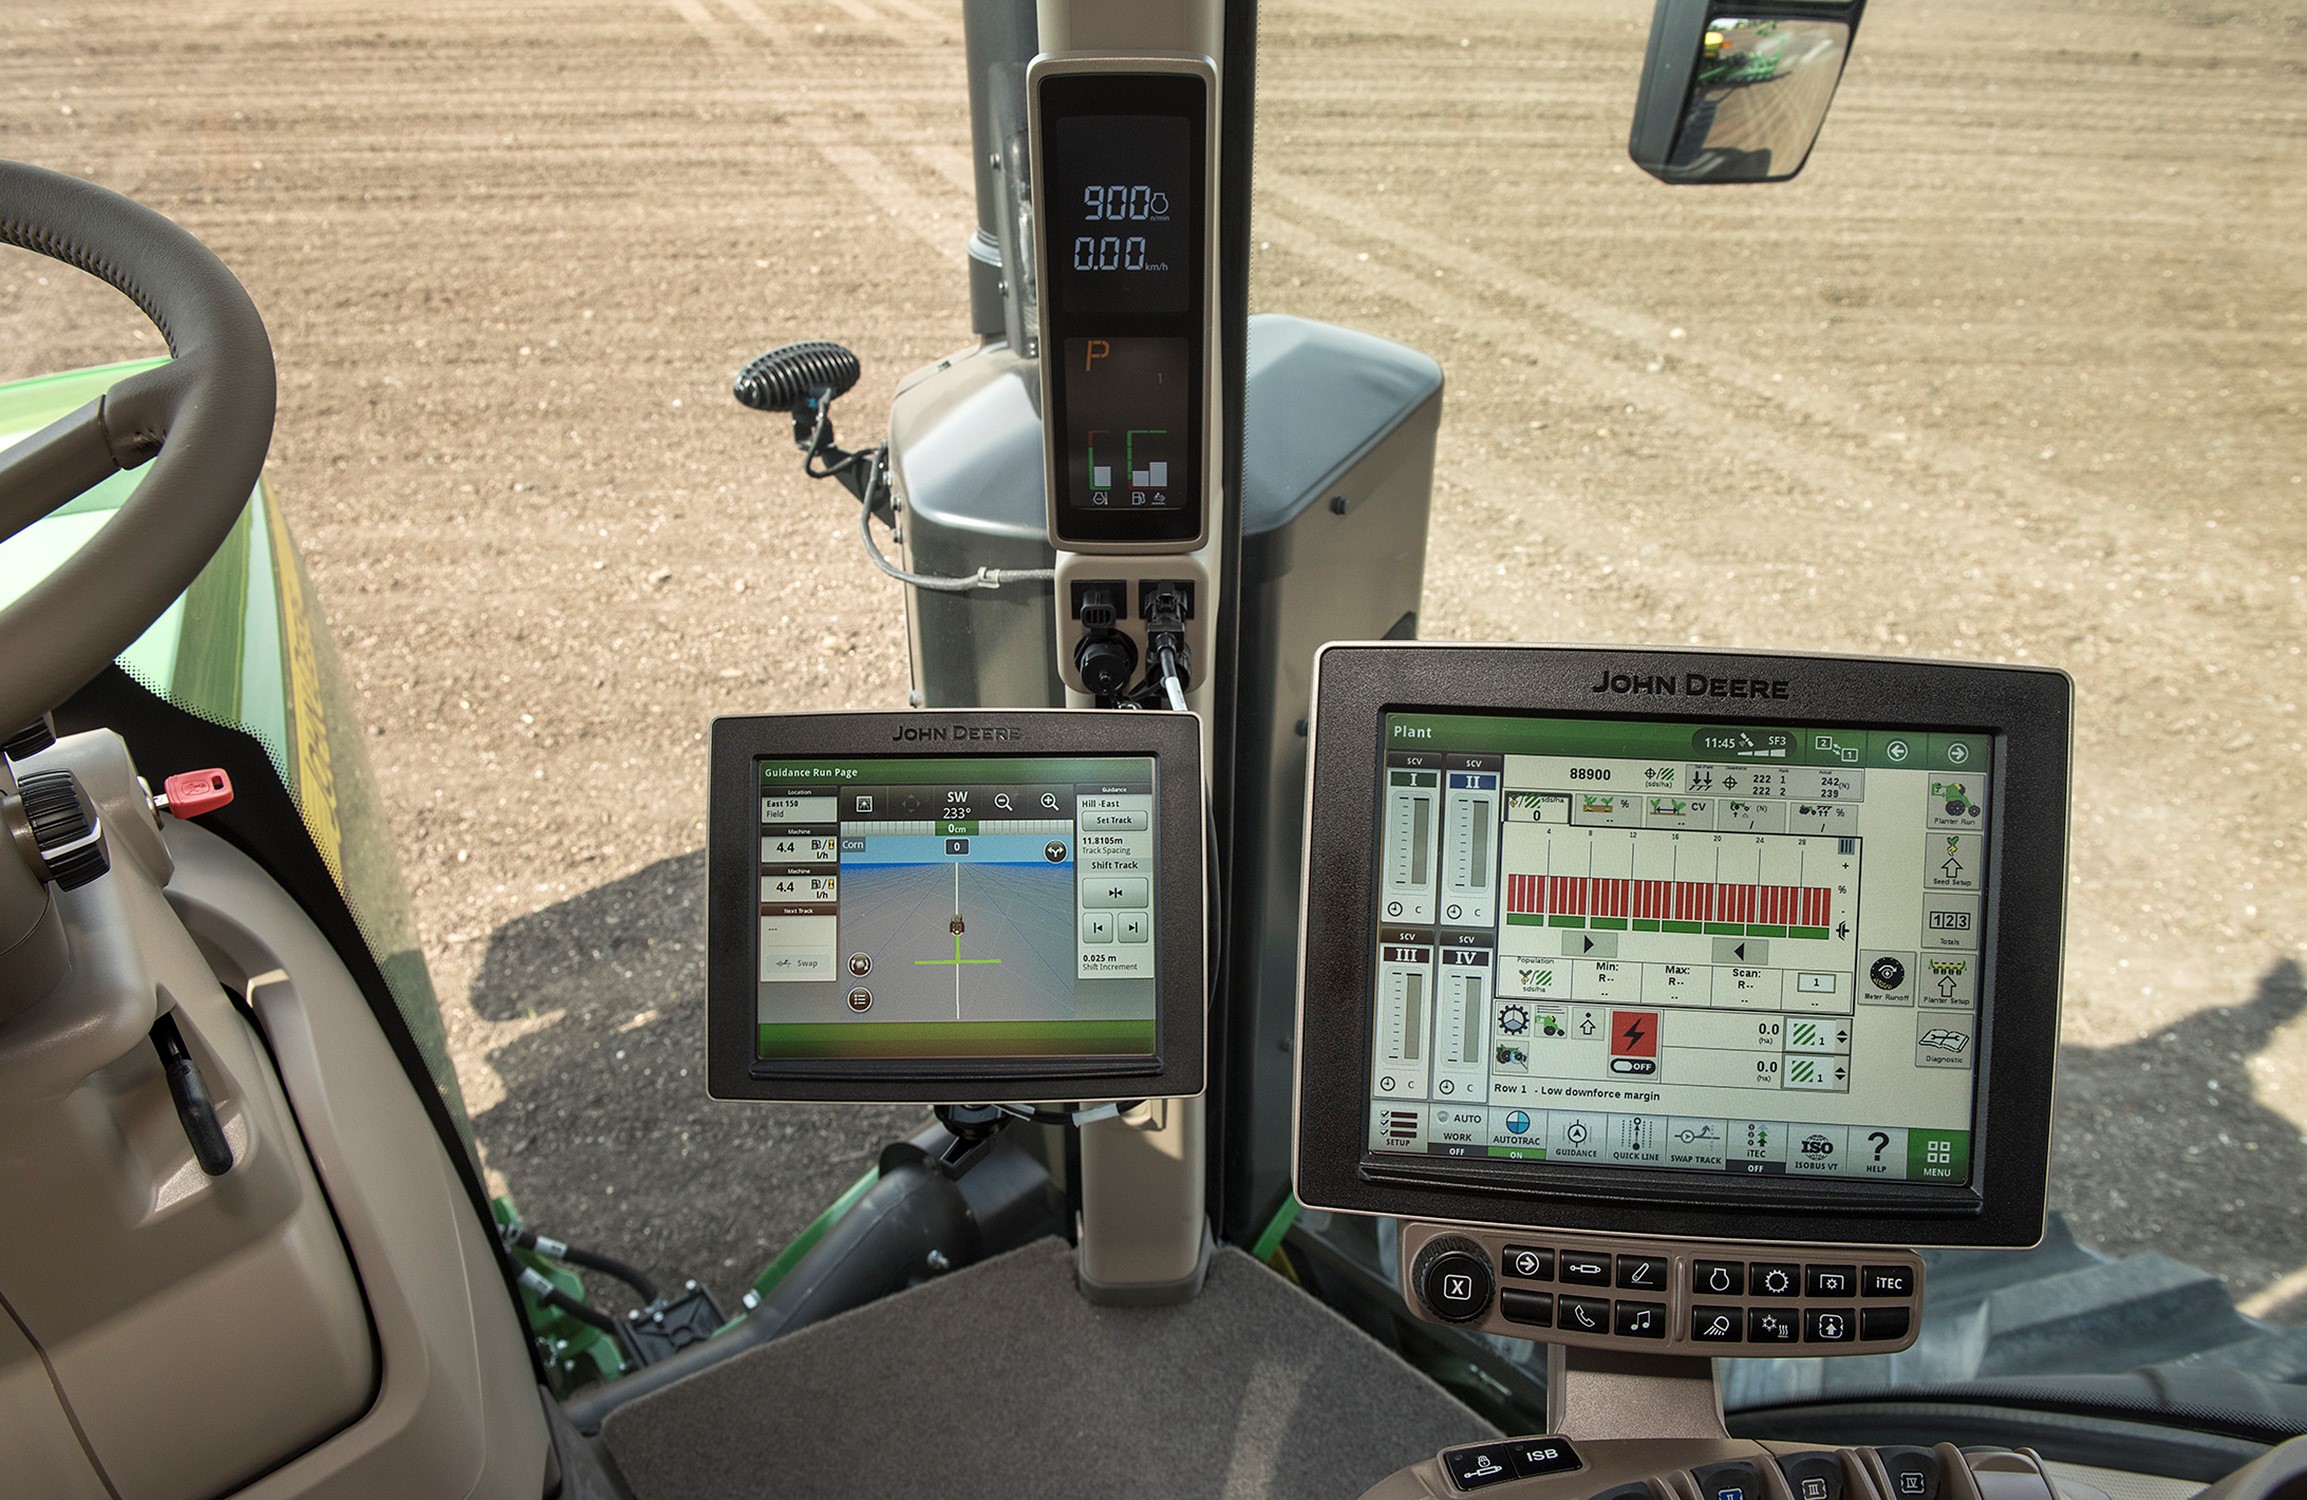 John Deere Introduces Gen 4 Extended Monitor & Rate Controller, Giving Operators Better Control